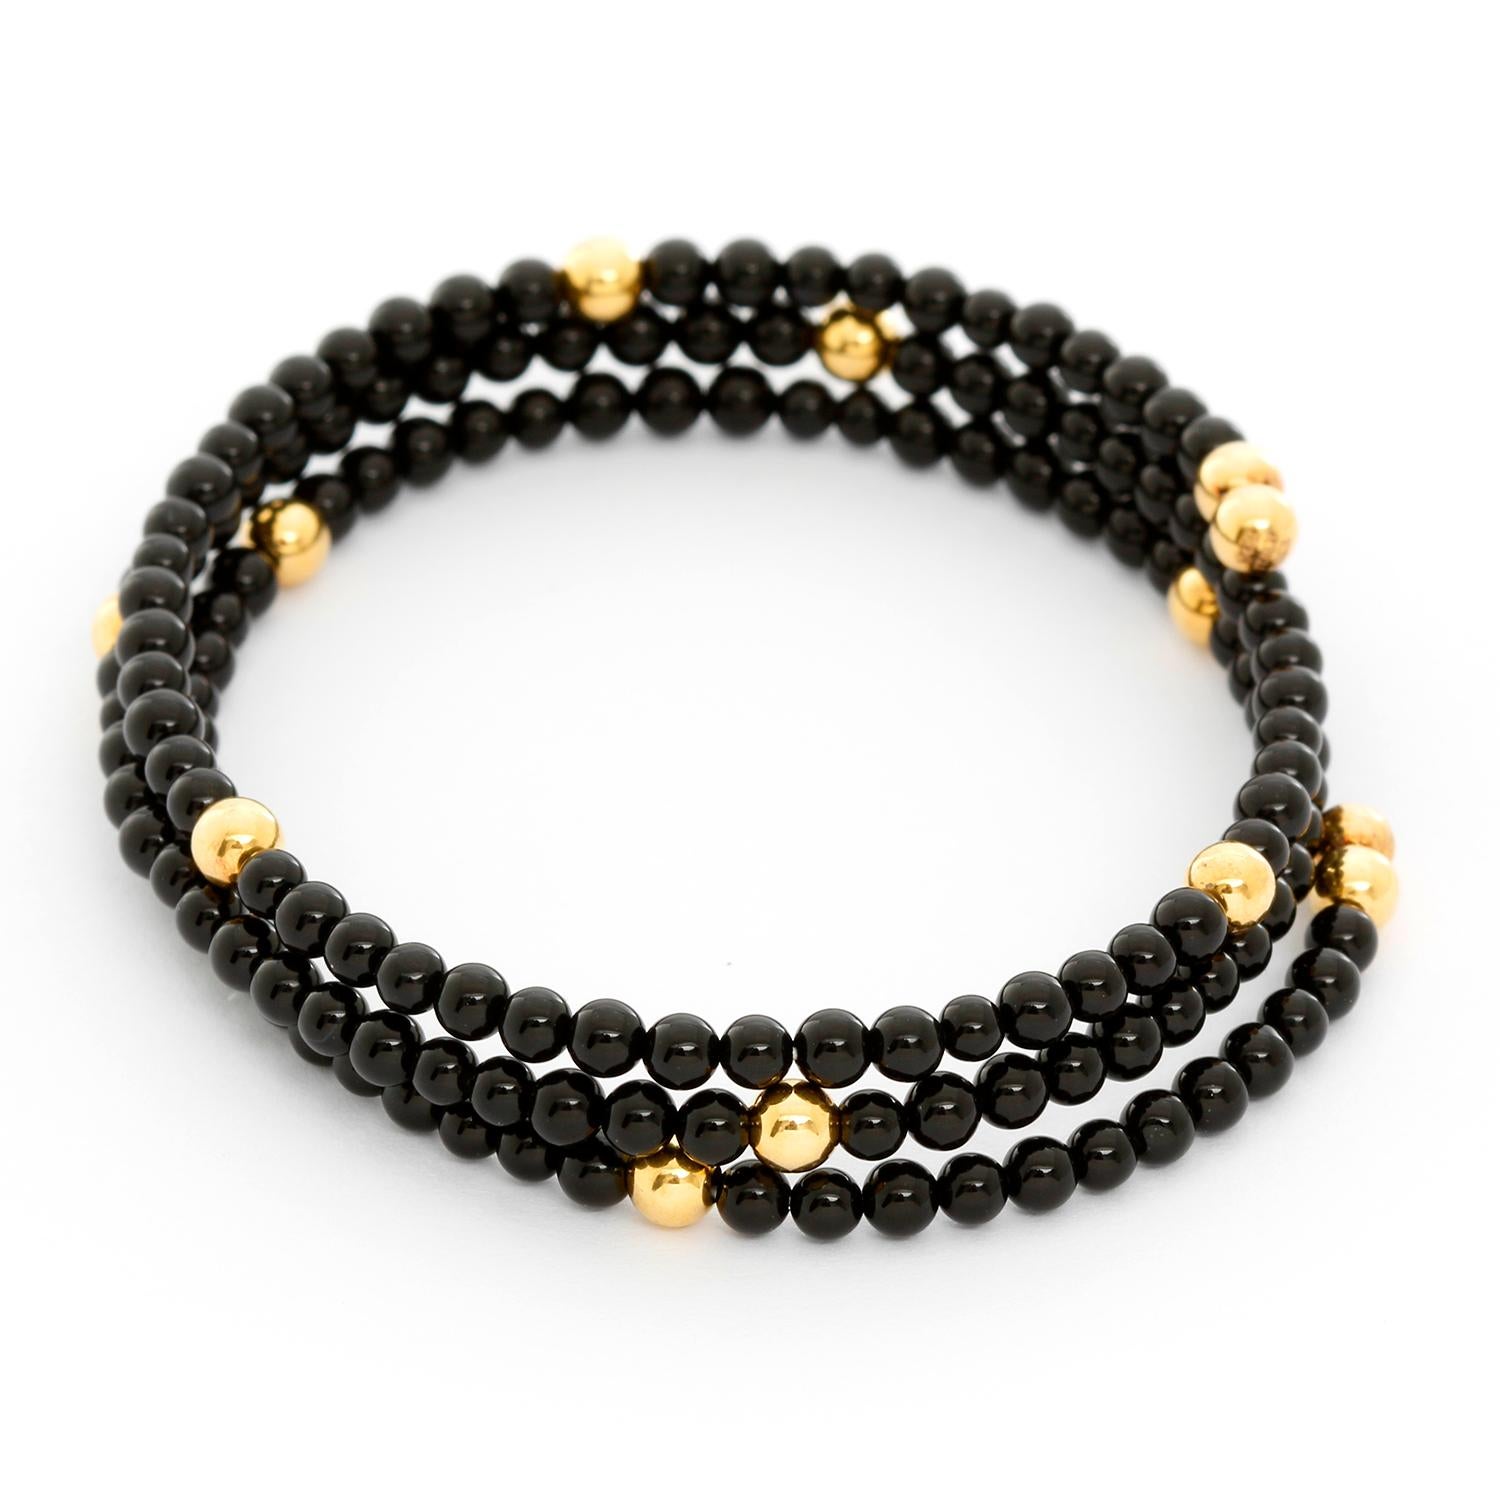 Black Onyx Beaded Bangle Bracelet  - Wrap cuff bracelet with 3 strands of 3mm black onyx beads and 4mm gold accent beads.Bracelet measures 6.5 inches but offers stretch. New with DeMesy box.